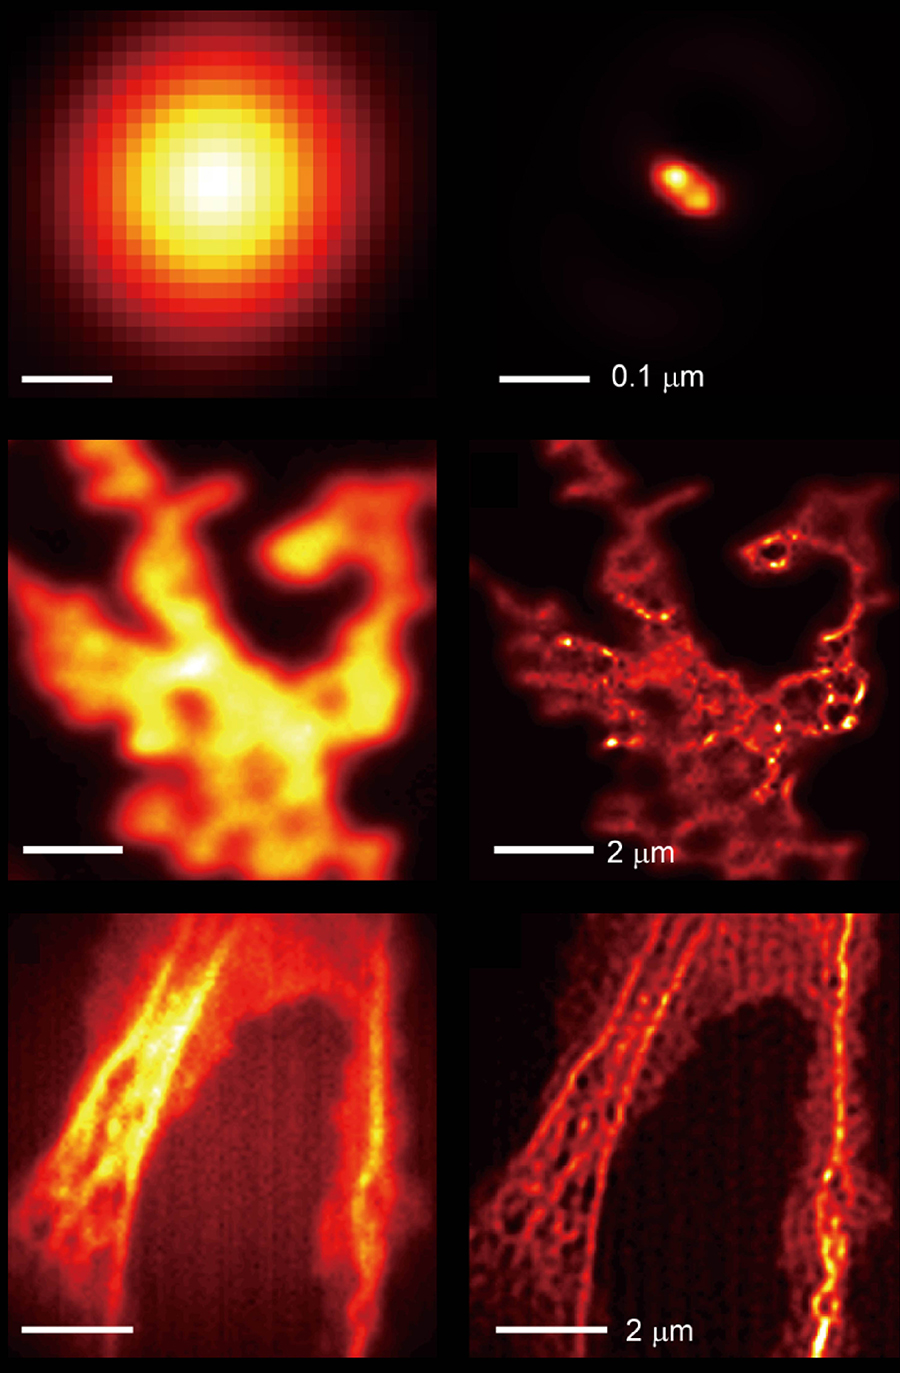 Microscope images displayed in orange against a black background.